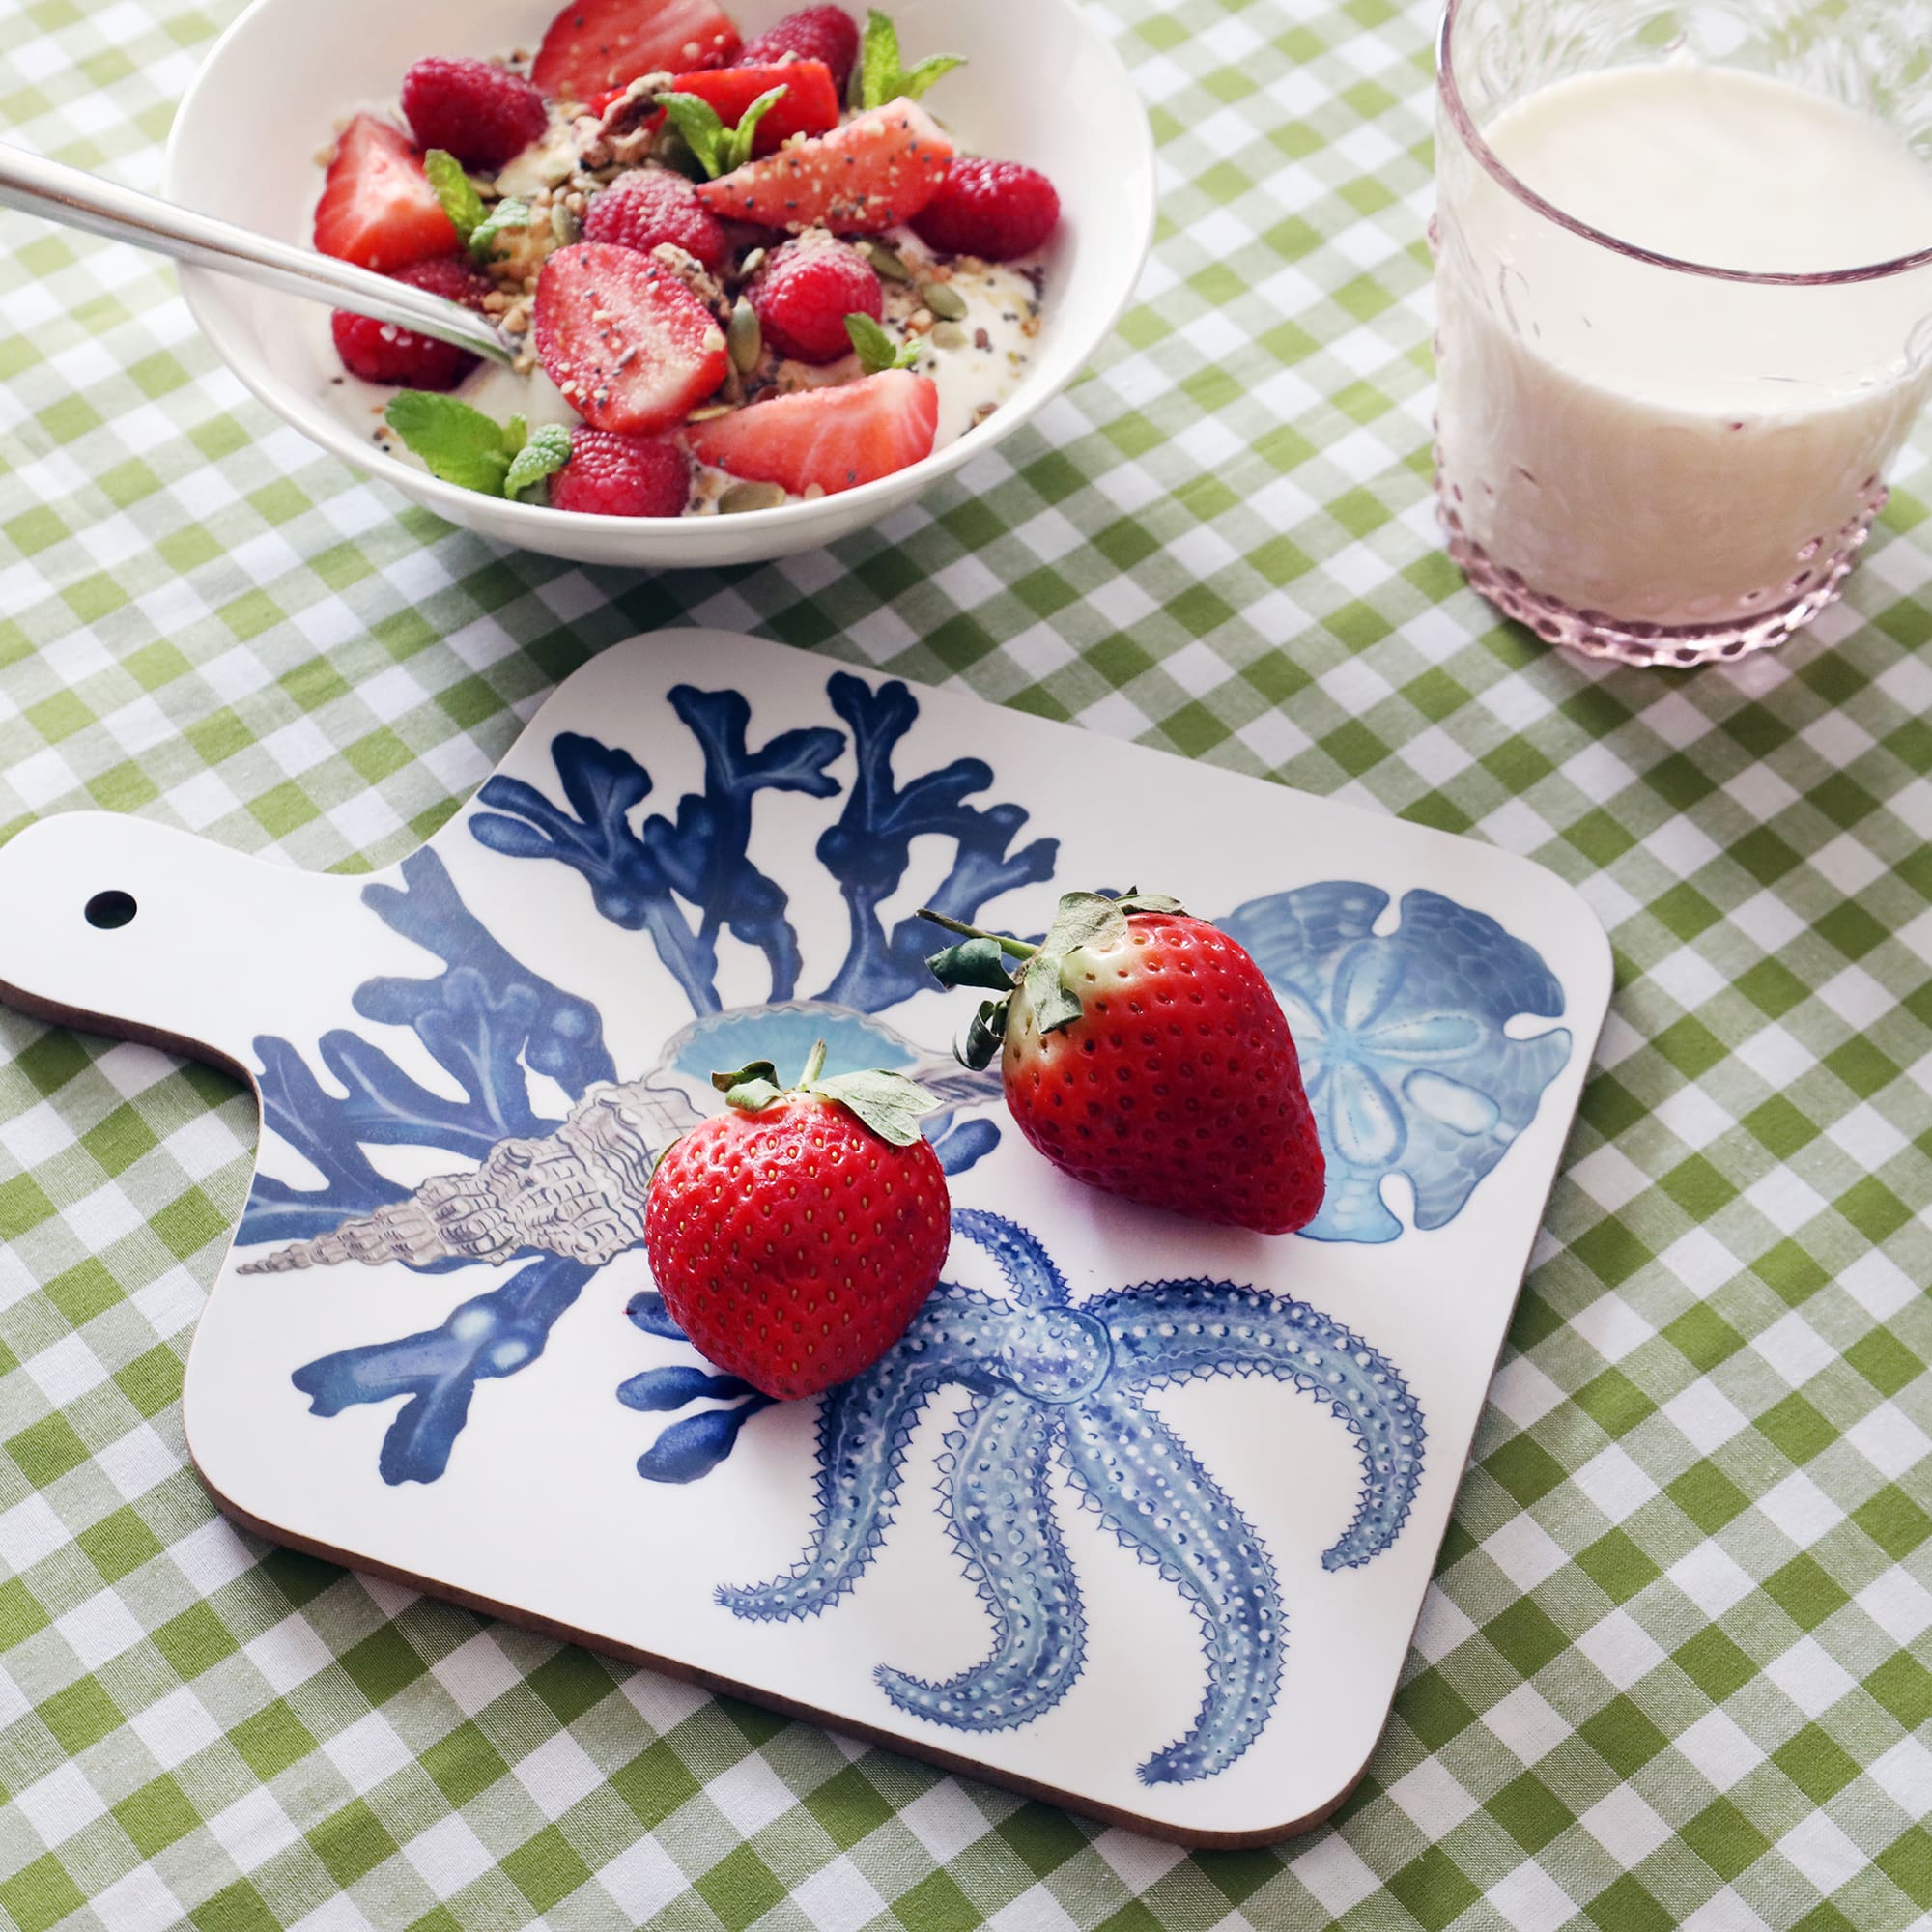 Beachcomber Chopping Board on a green gingham cloth.Also on the table is a bowl with strawberries and seeds next to a glass of milk in a pink tumbler